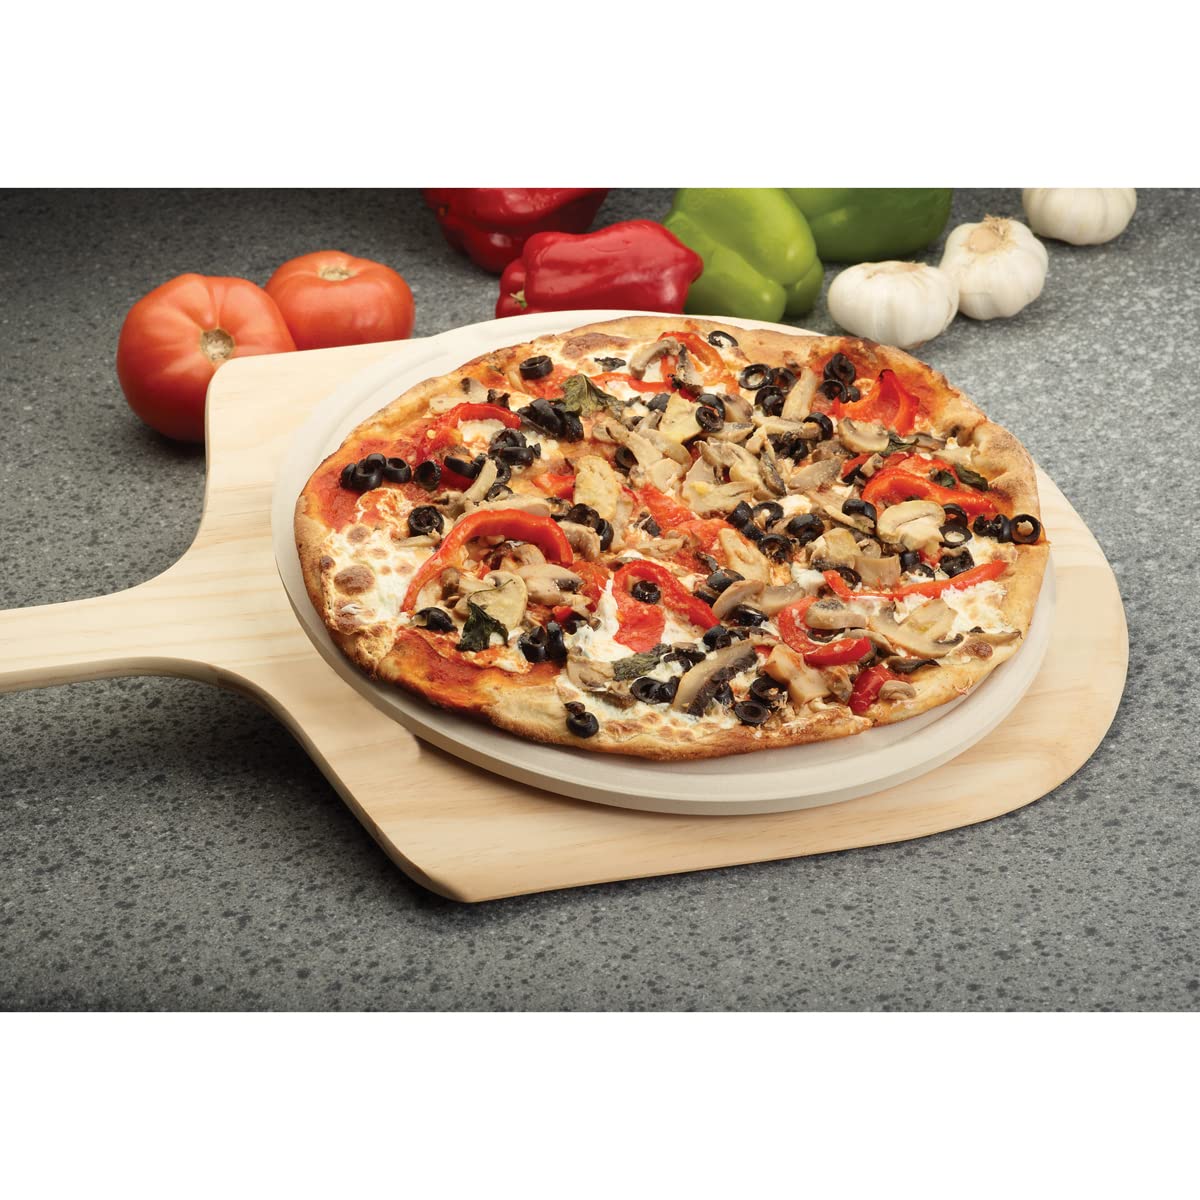 Fante's HIC Pizza Baking Stone with Serving Rack, Natural Ceramic Stoneware, 13